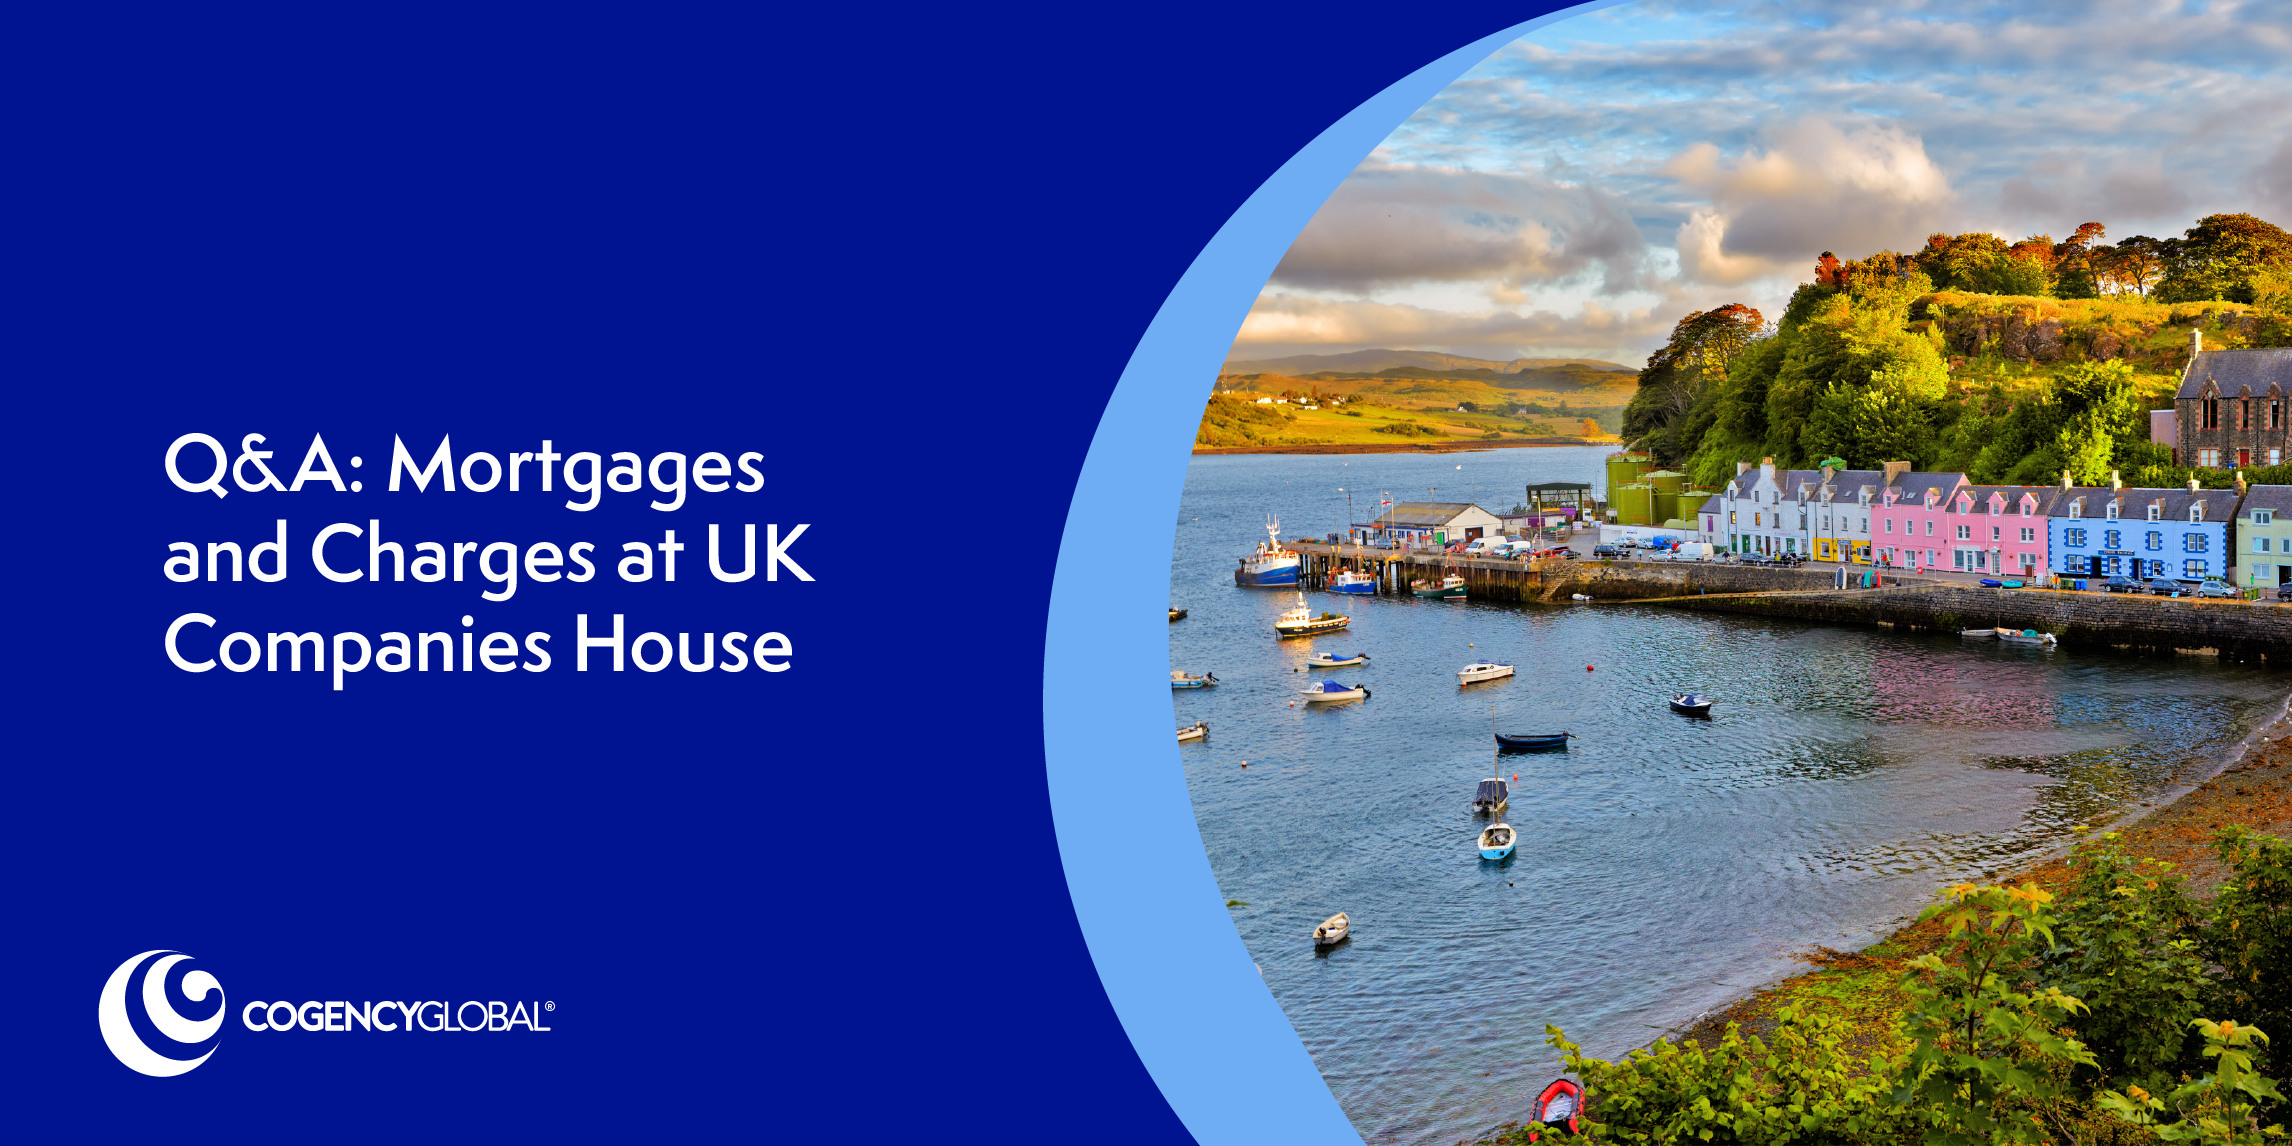 10 Questions Answered About Mortgages and Charges at UK Companies House